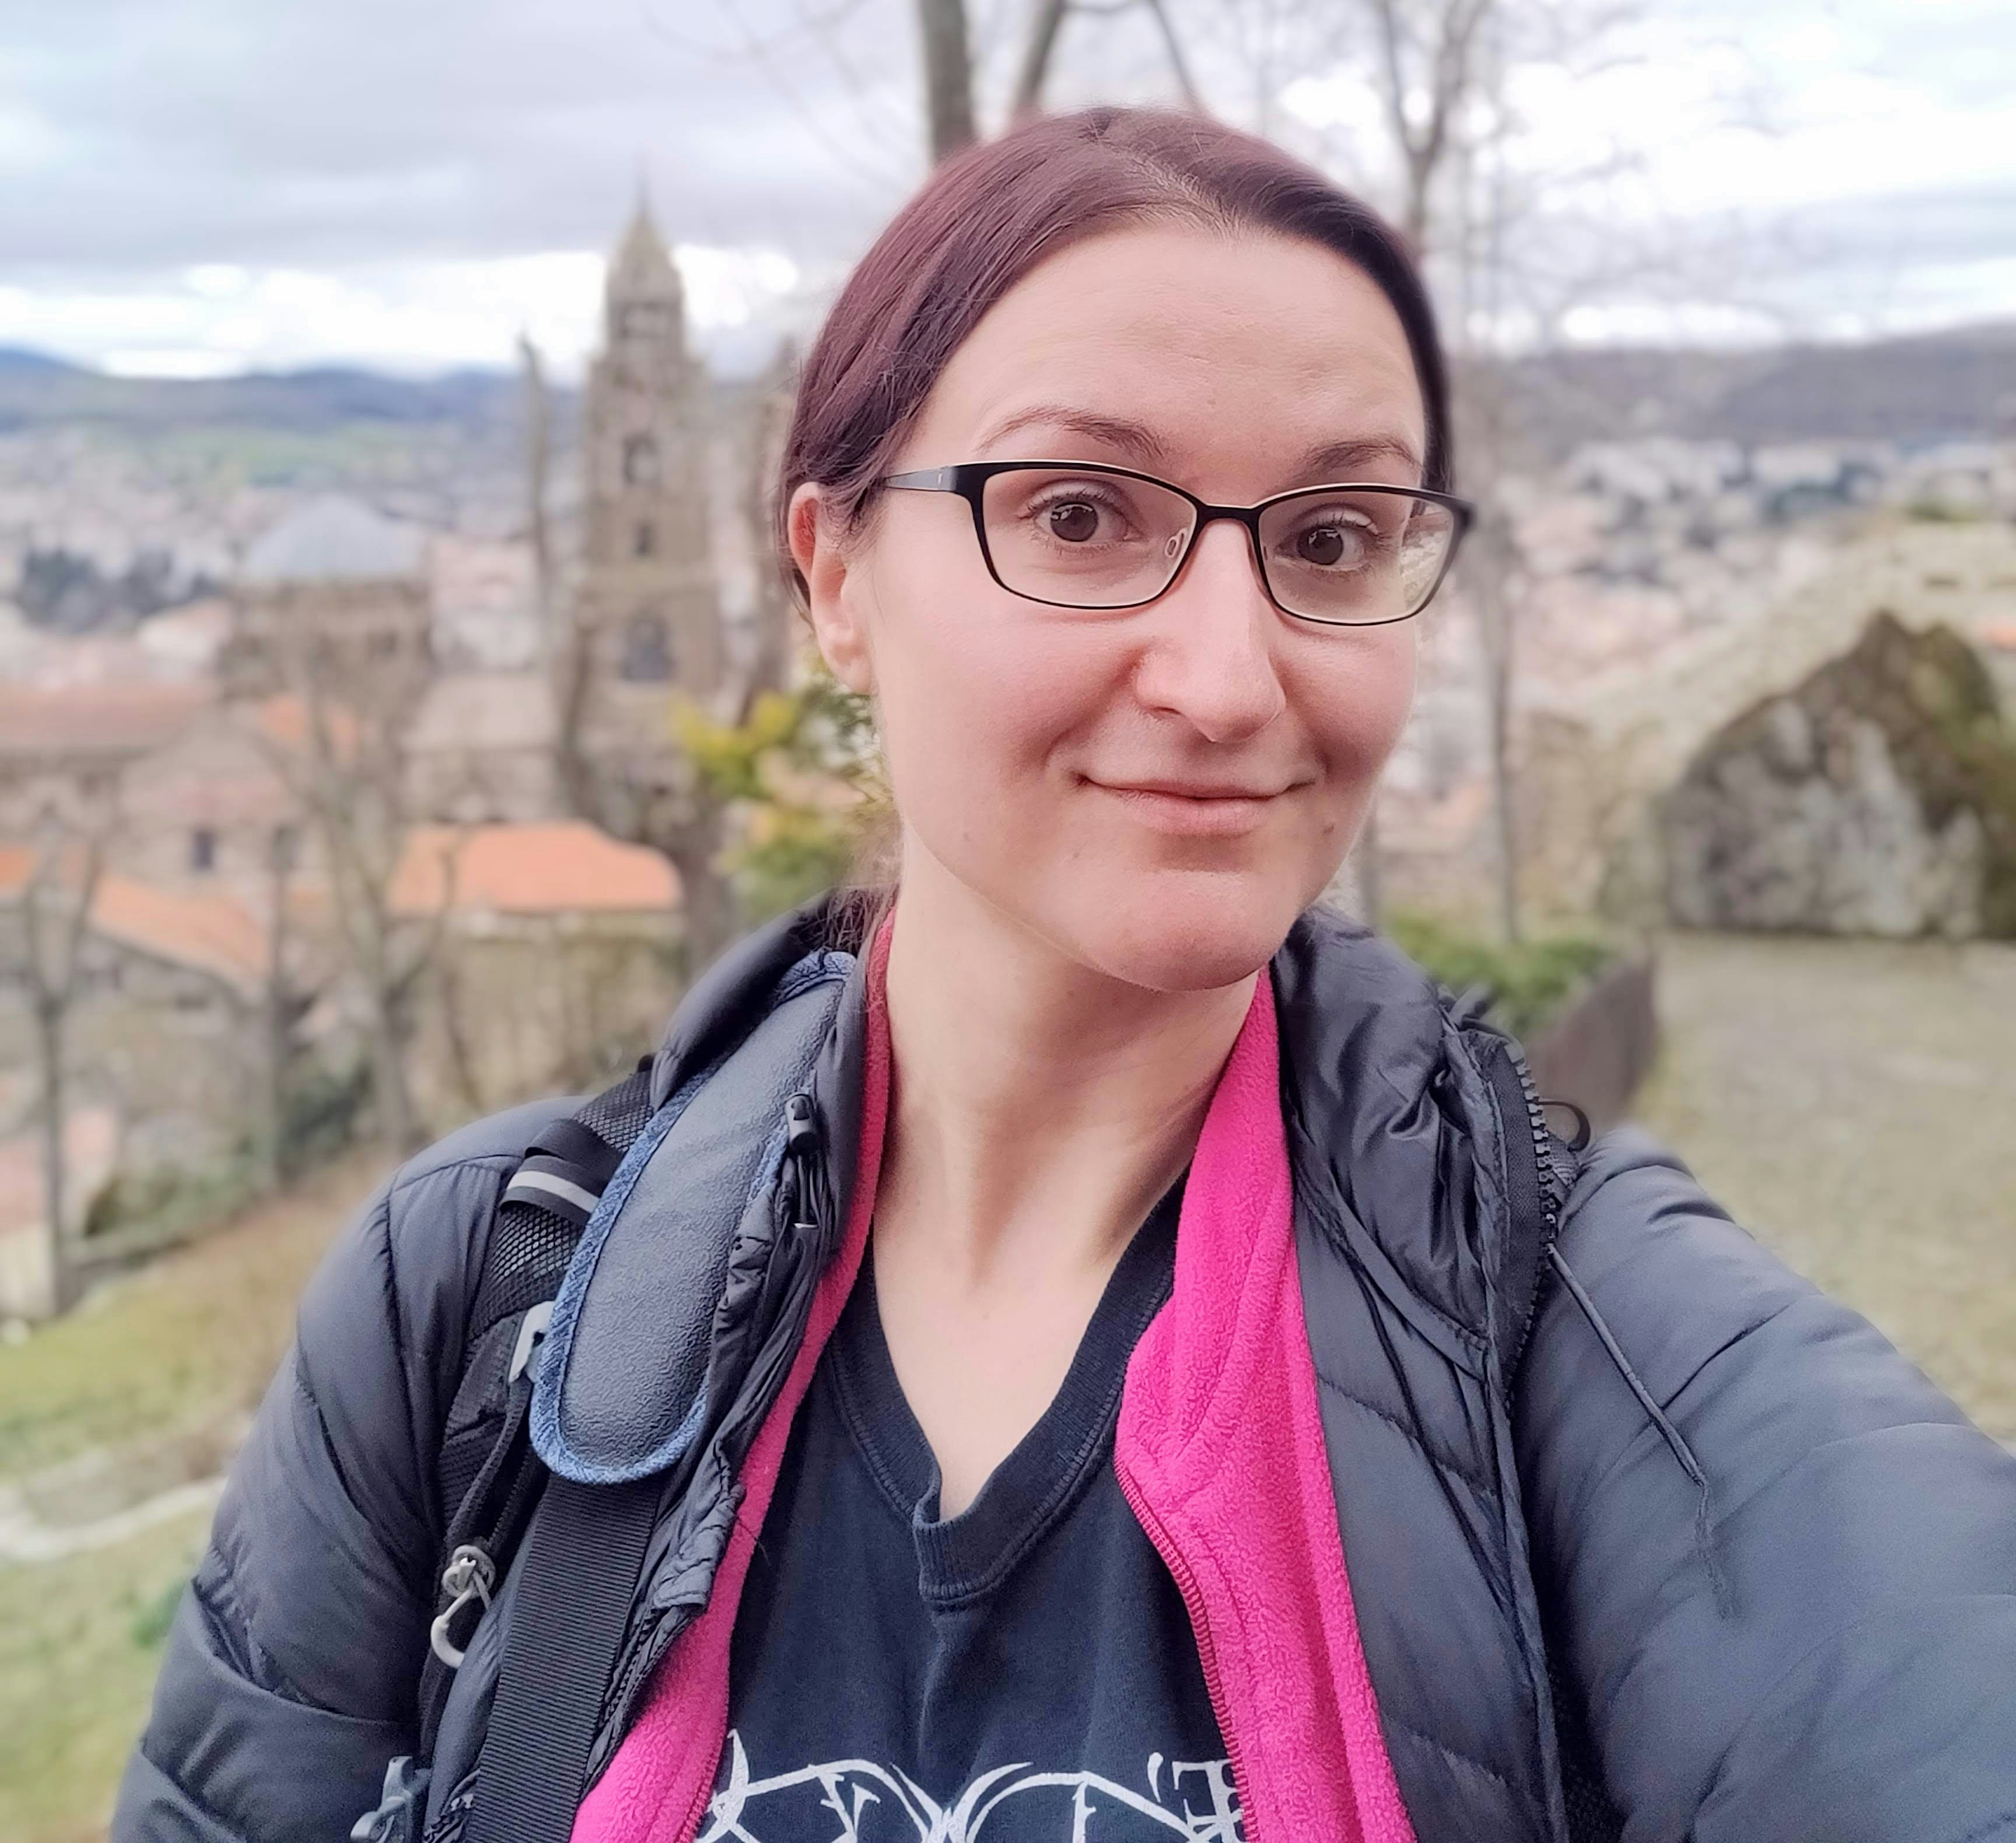 Anita Isalska poses for a selfie in front of a picturesque town in France.